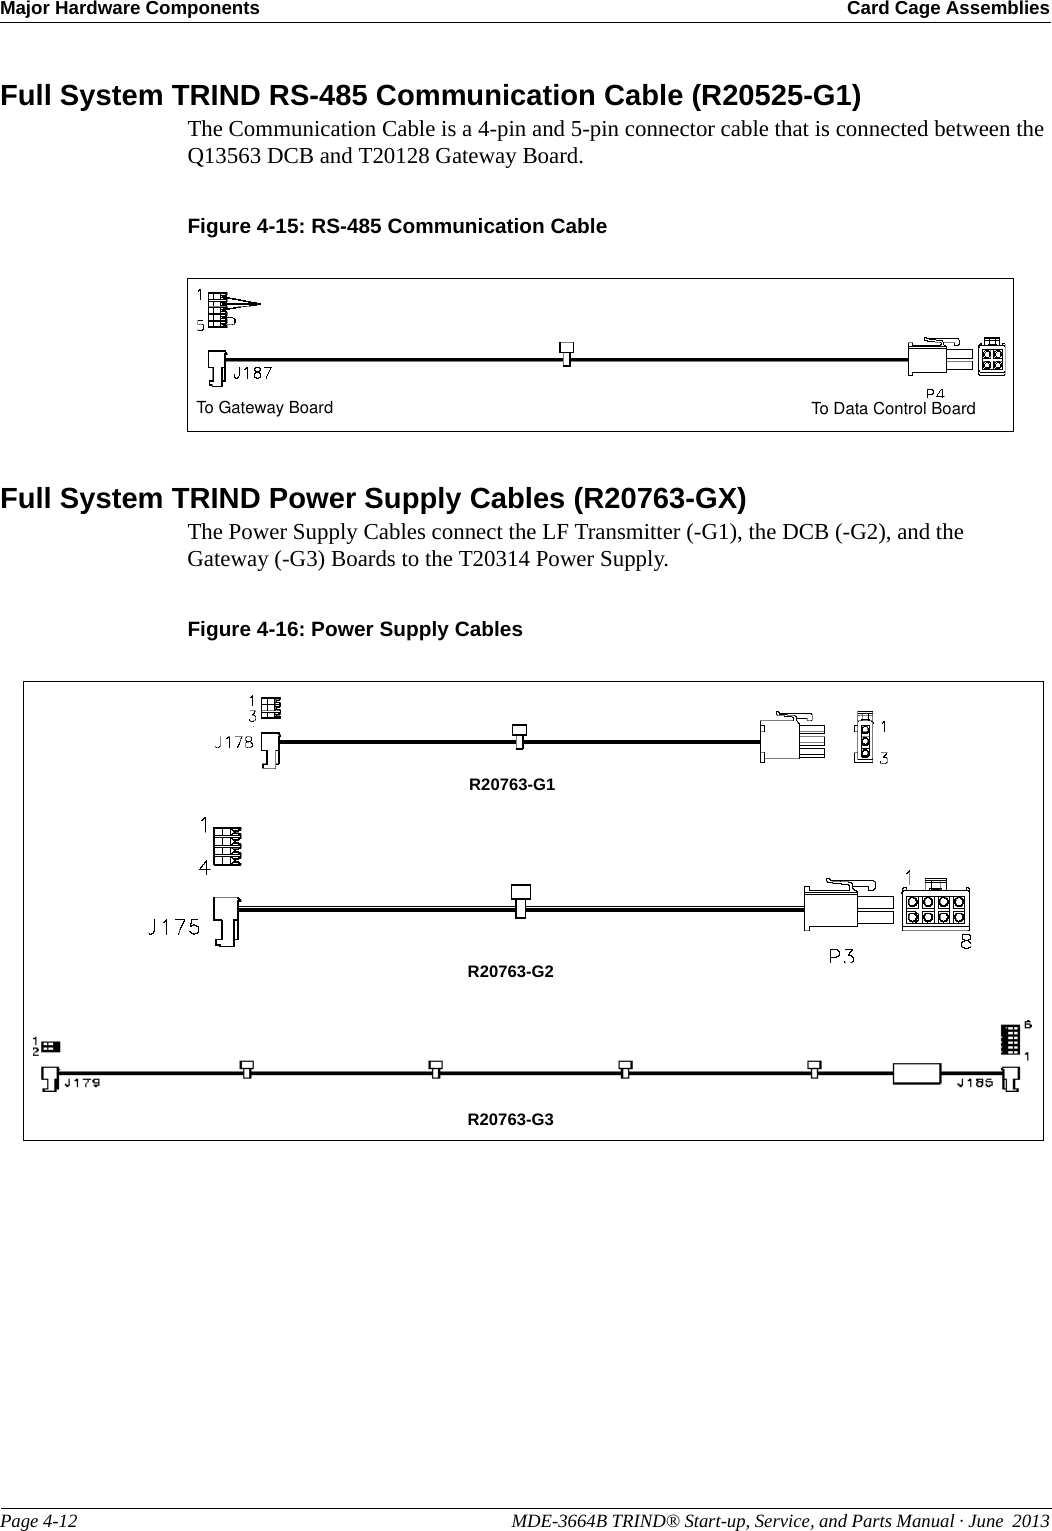 Major Hardware Components Card Cage AssembliesPage 4-12                                                                                                  MDE-3664B TRIND® Start-up, Service, and Parts Manual · June  2013Full System TRIND RS-485 Communication Cable (R20525-G1)The Communication Cable is a 4-pin and 5-pin connector cable that is connected between the Q13563 DCB and T20128 Gateway Board.Figure 4-15: RS-485 Communication CableTo Gateway Board To Data Control BoardFull System TRIND Power Supply Cables (R20763-GX)The Power Supply Cables connect the LF Transmitter (-G1), the DCB (-G2), and the Gateway (-G3) Boards to the T20314 Power Supply.Figure 4-16: Power Supply CablesR20763-G1R20763-G2R20763-G3